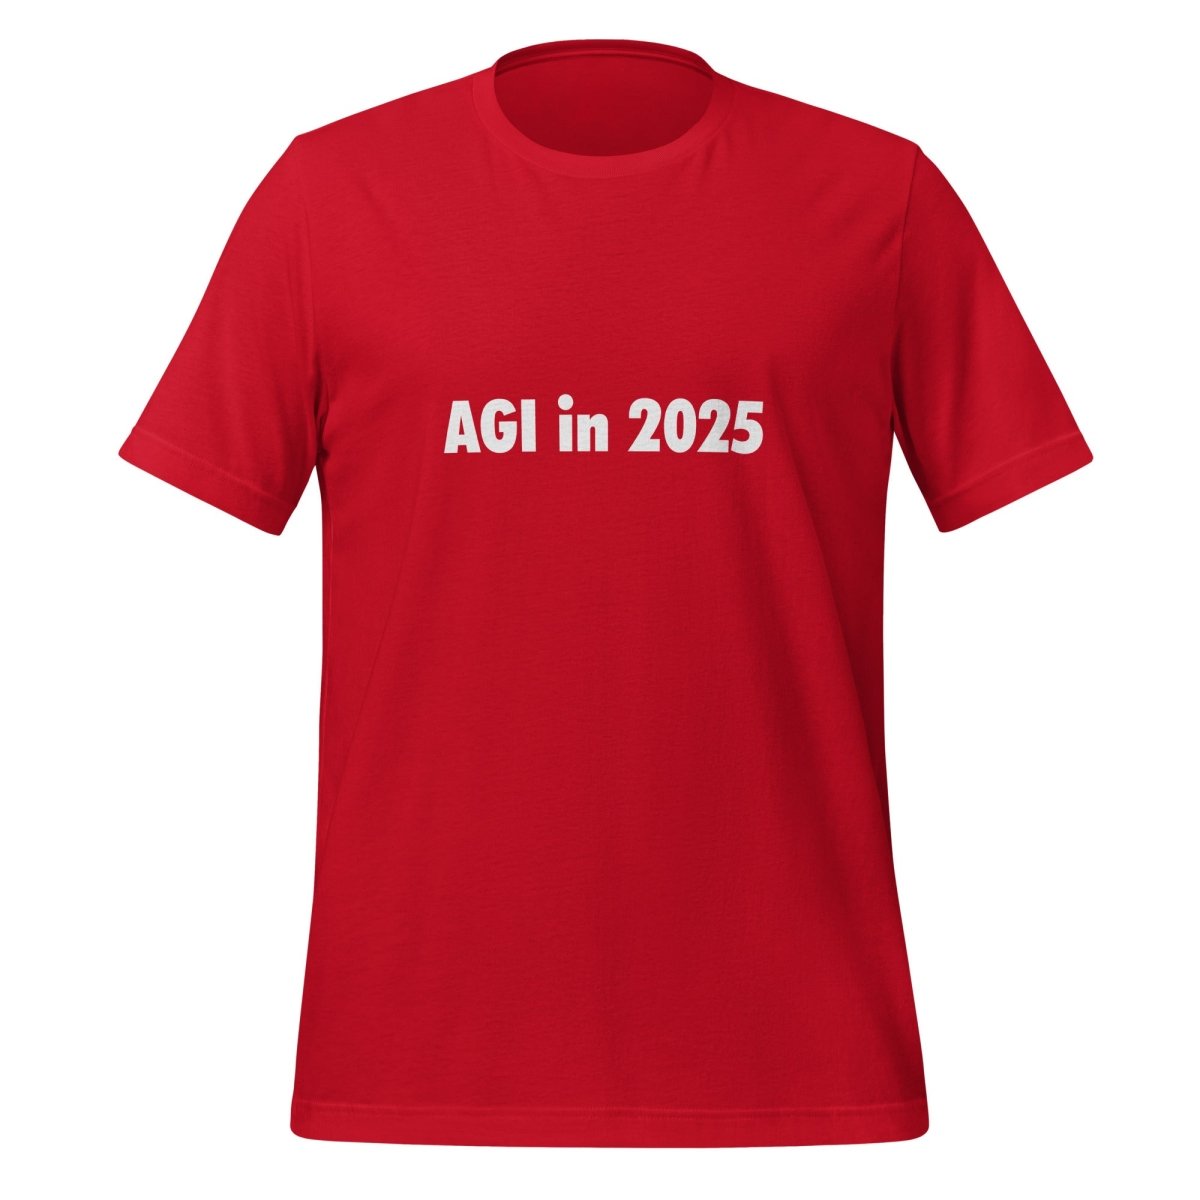 AGI in 2025 T - Shirt (unisex) - Red - AI Store